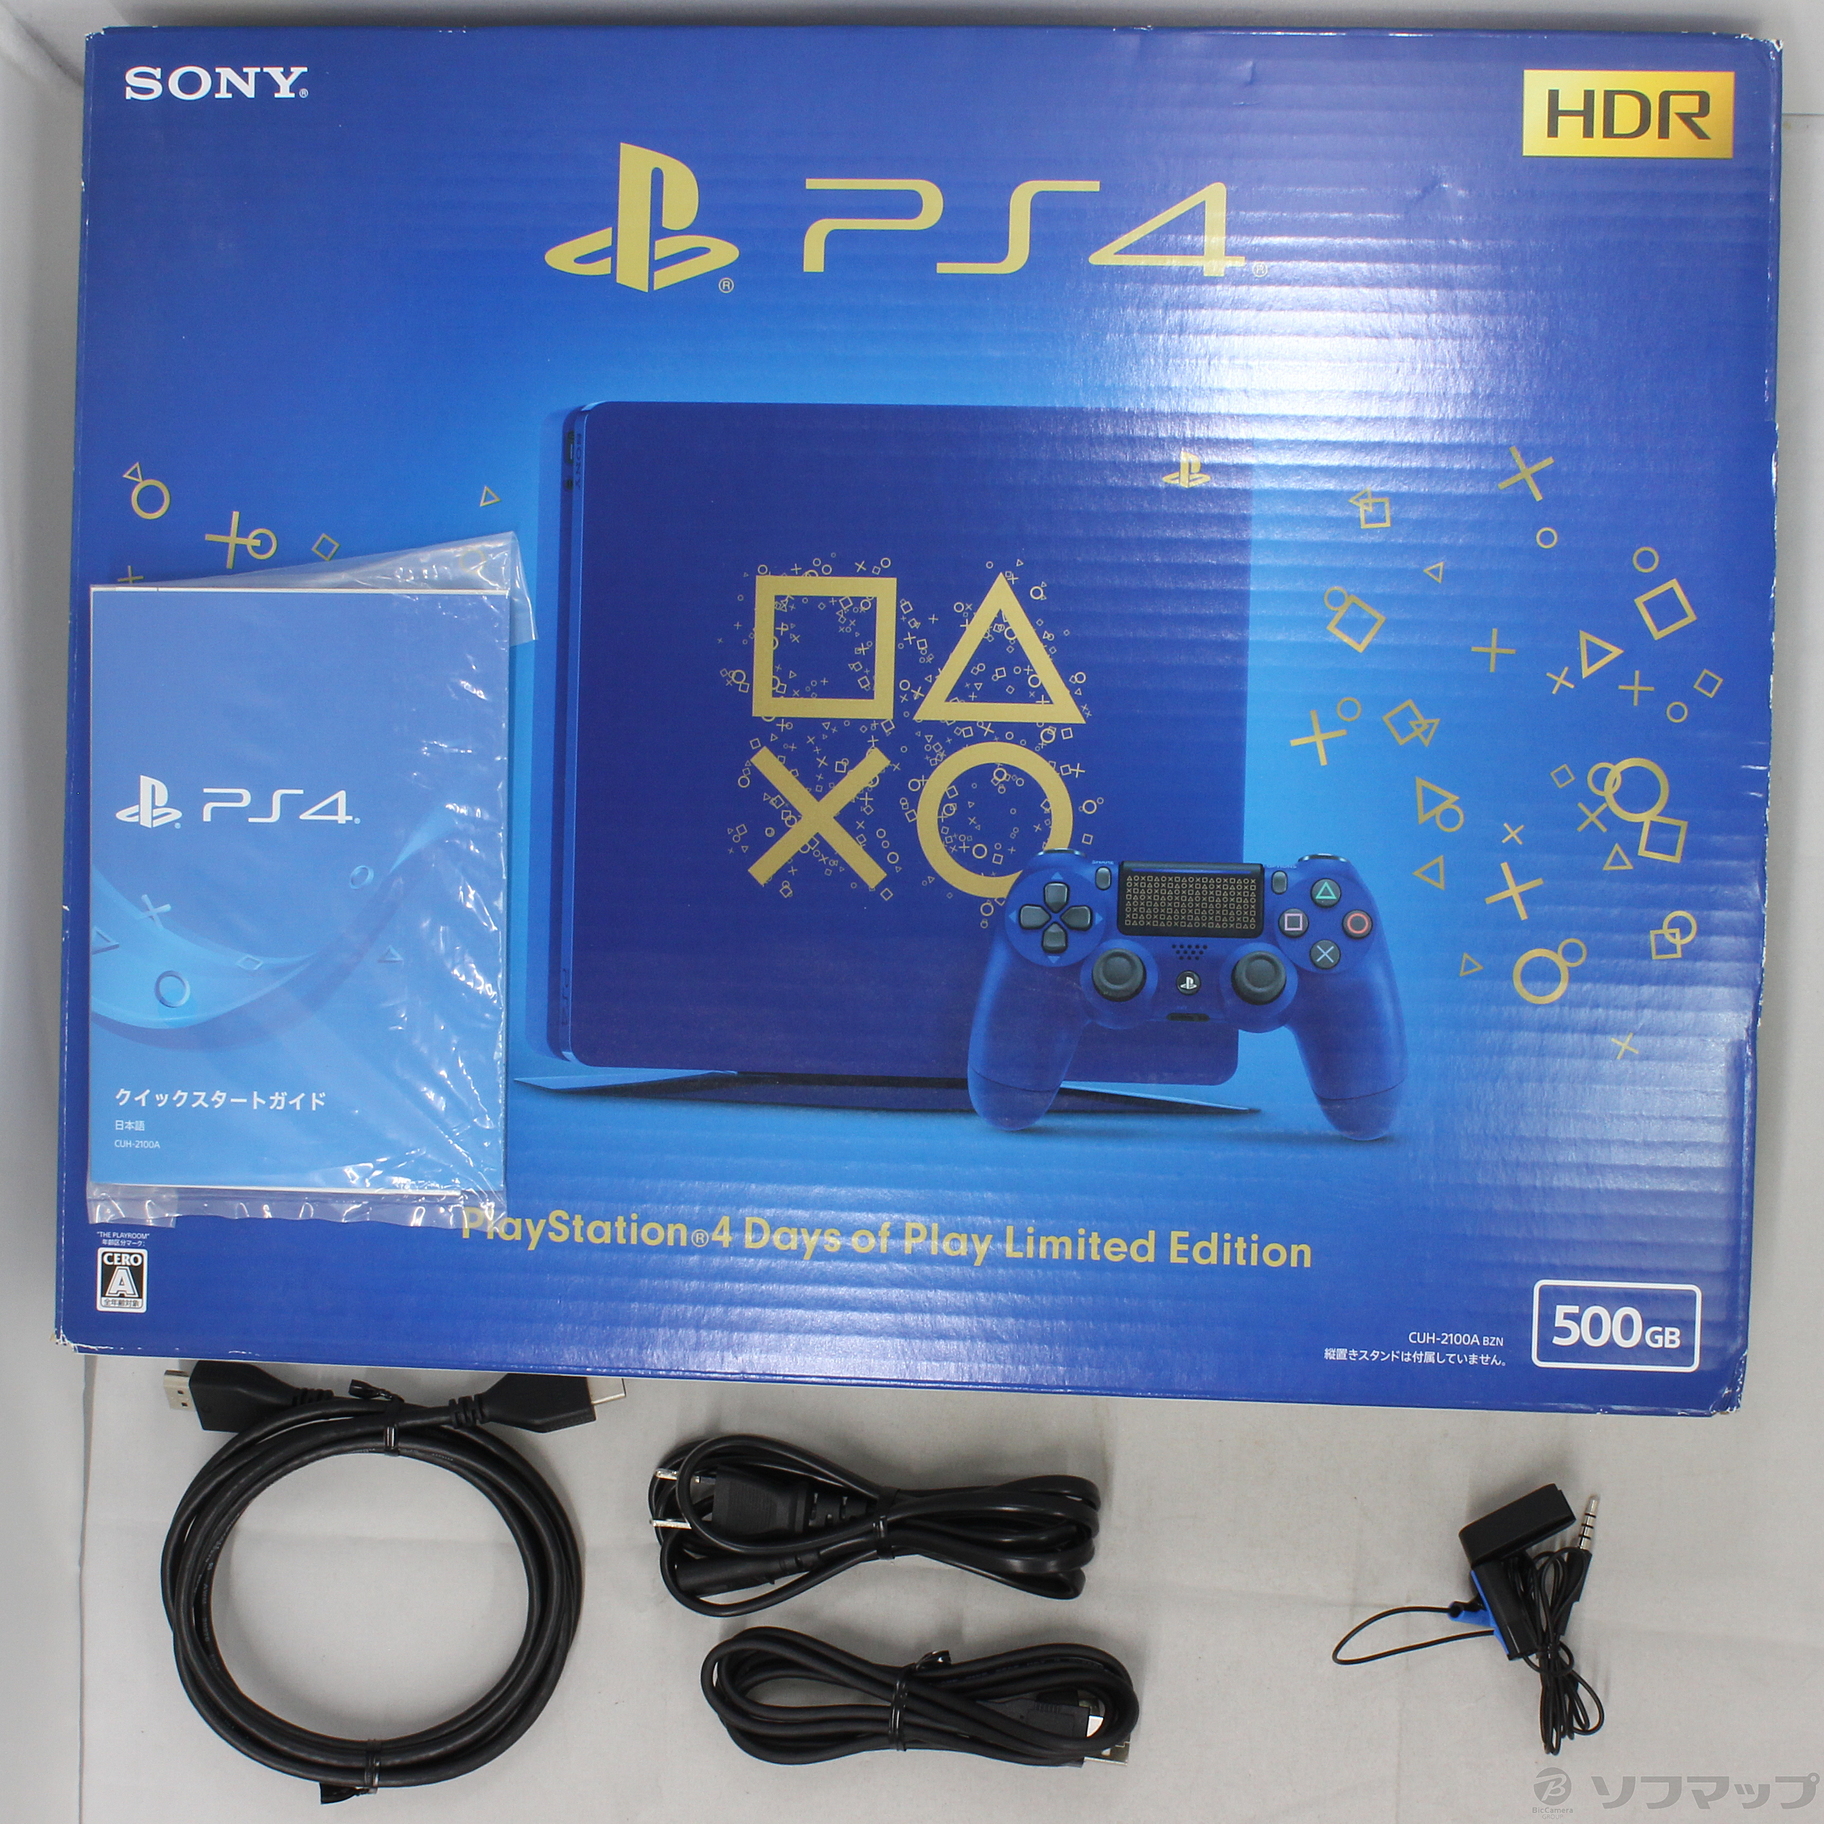 PlayStation4 Days of Play Limited Edition CUH-2200BBZR oinomori.co.jp